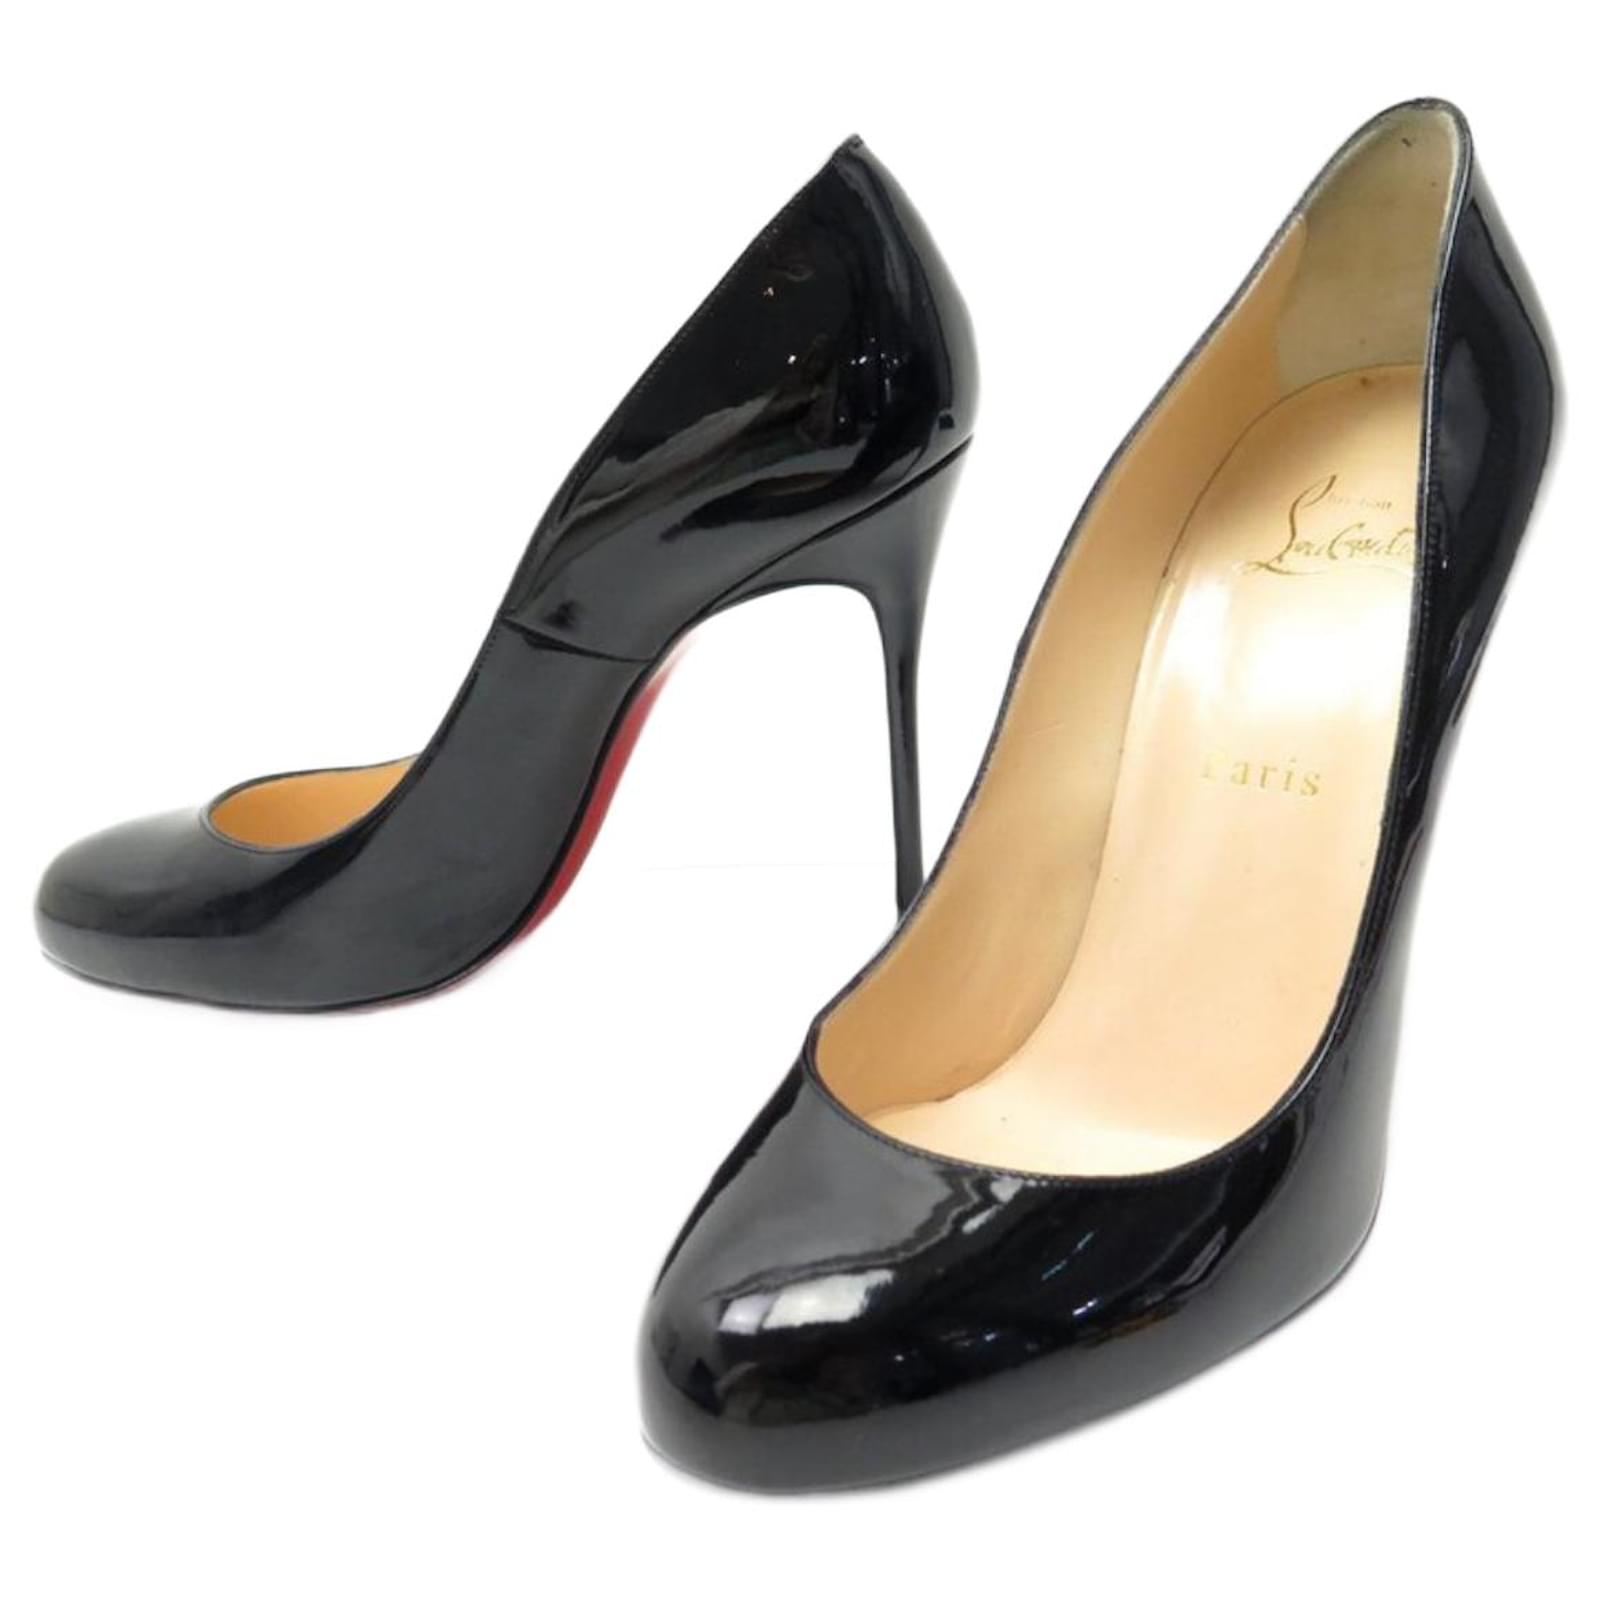 NEW CHRISTIAN LOUBOUTIN SHOES ESCARPIN DOLLY PUMP T39 3220702b439 Black Patent leather ref.784803 pic